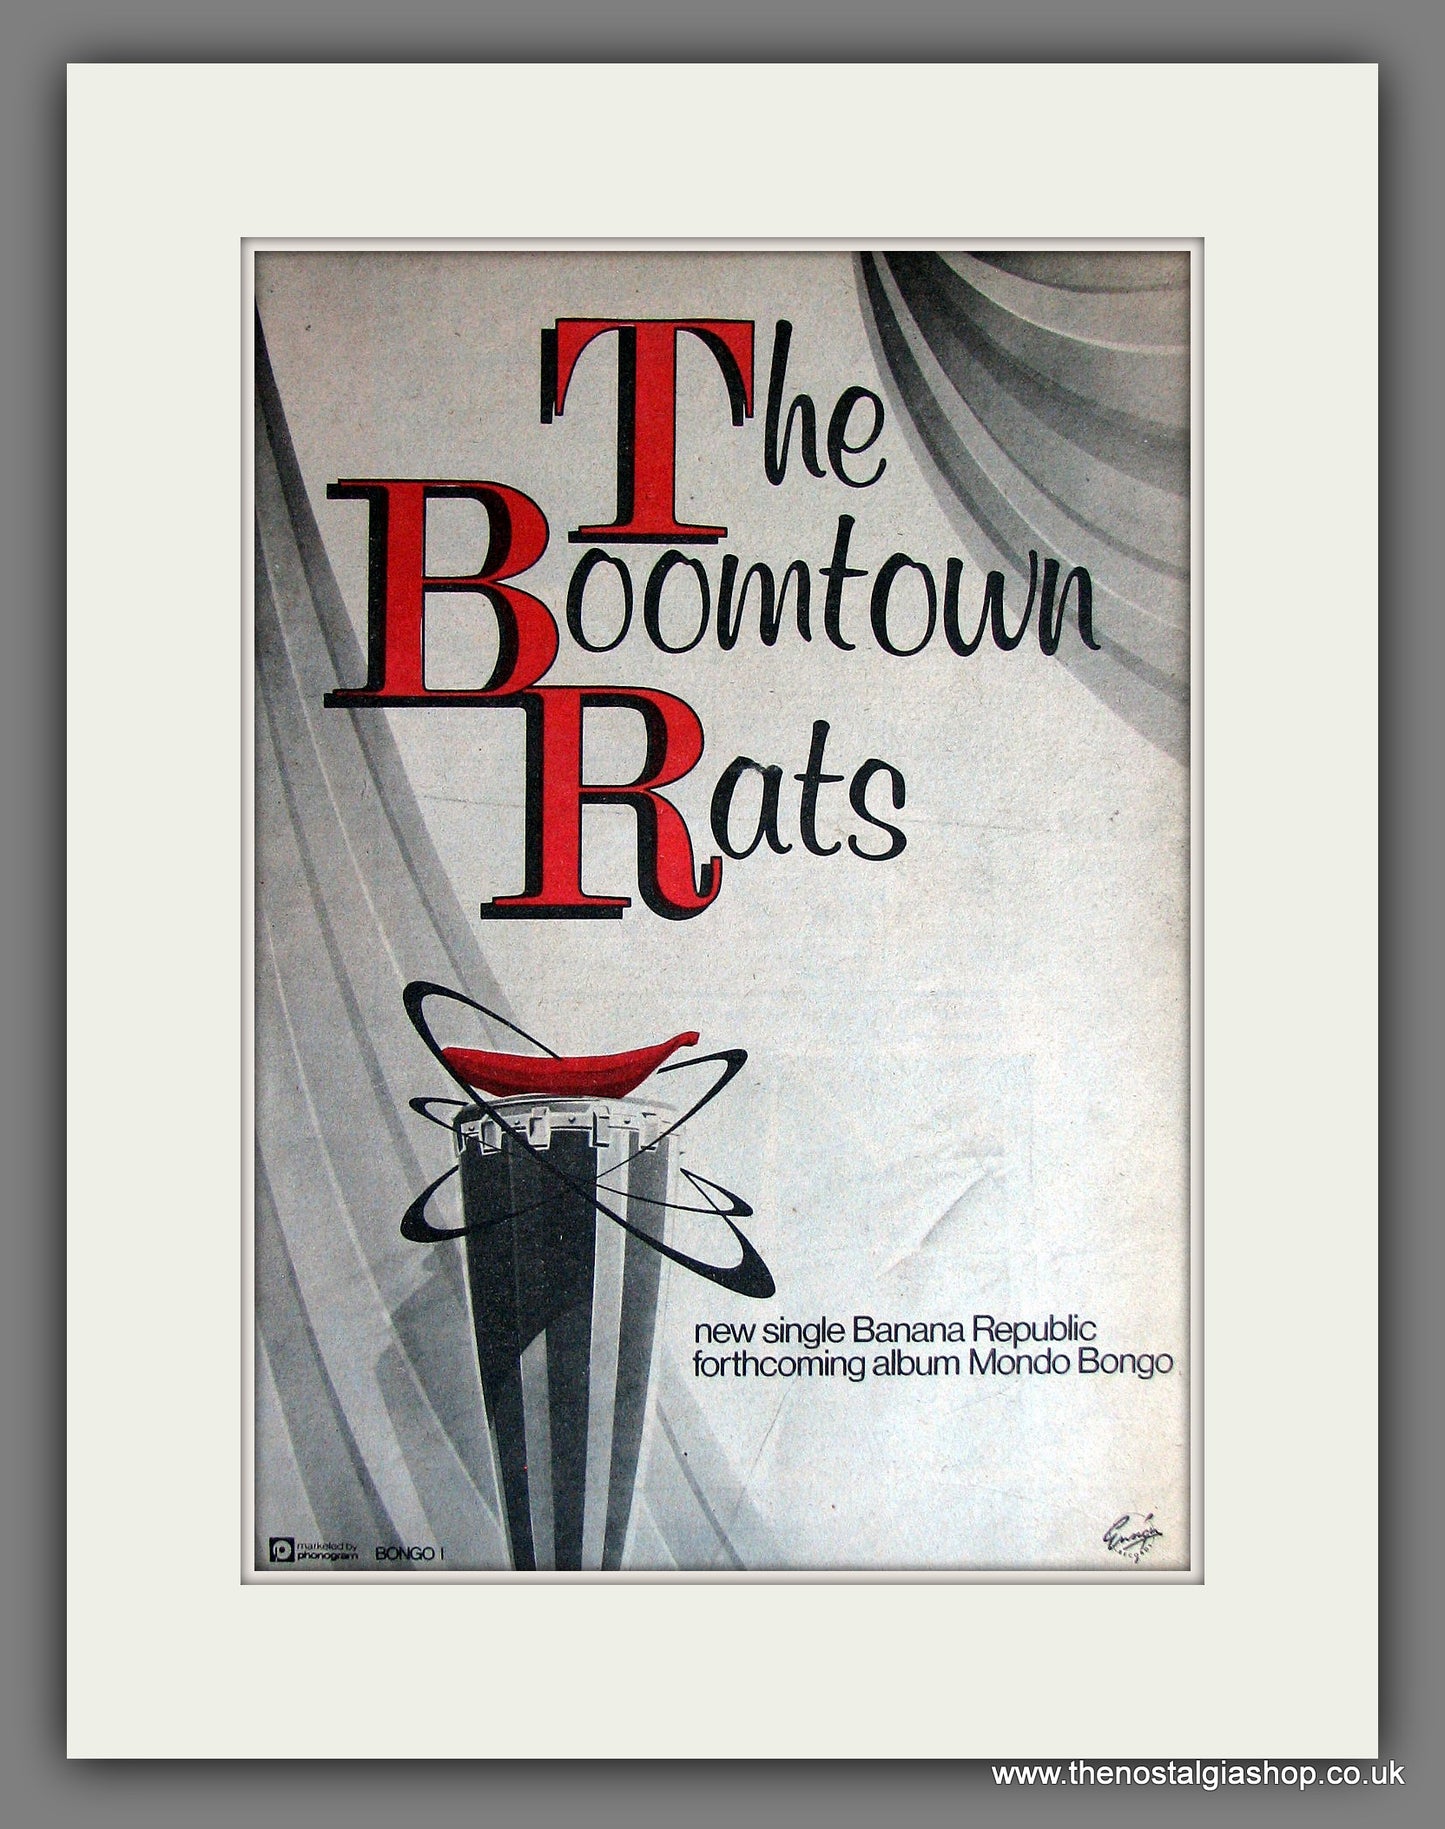 Boomtown Rats (The) Banana Republic. Vintage Advert 1980 (ref AD14017)